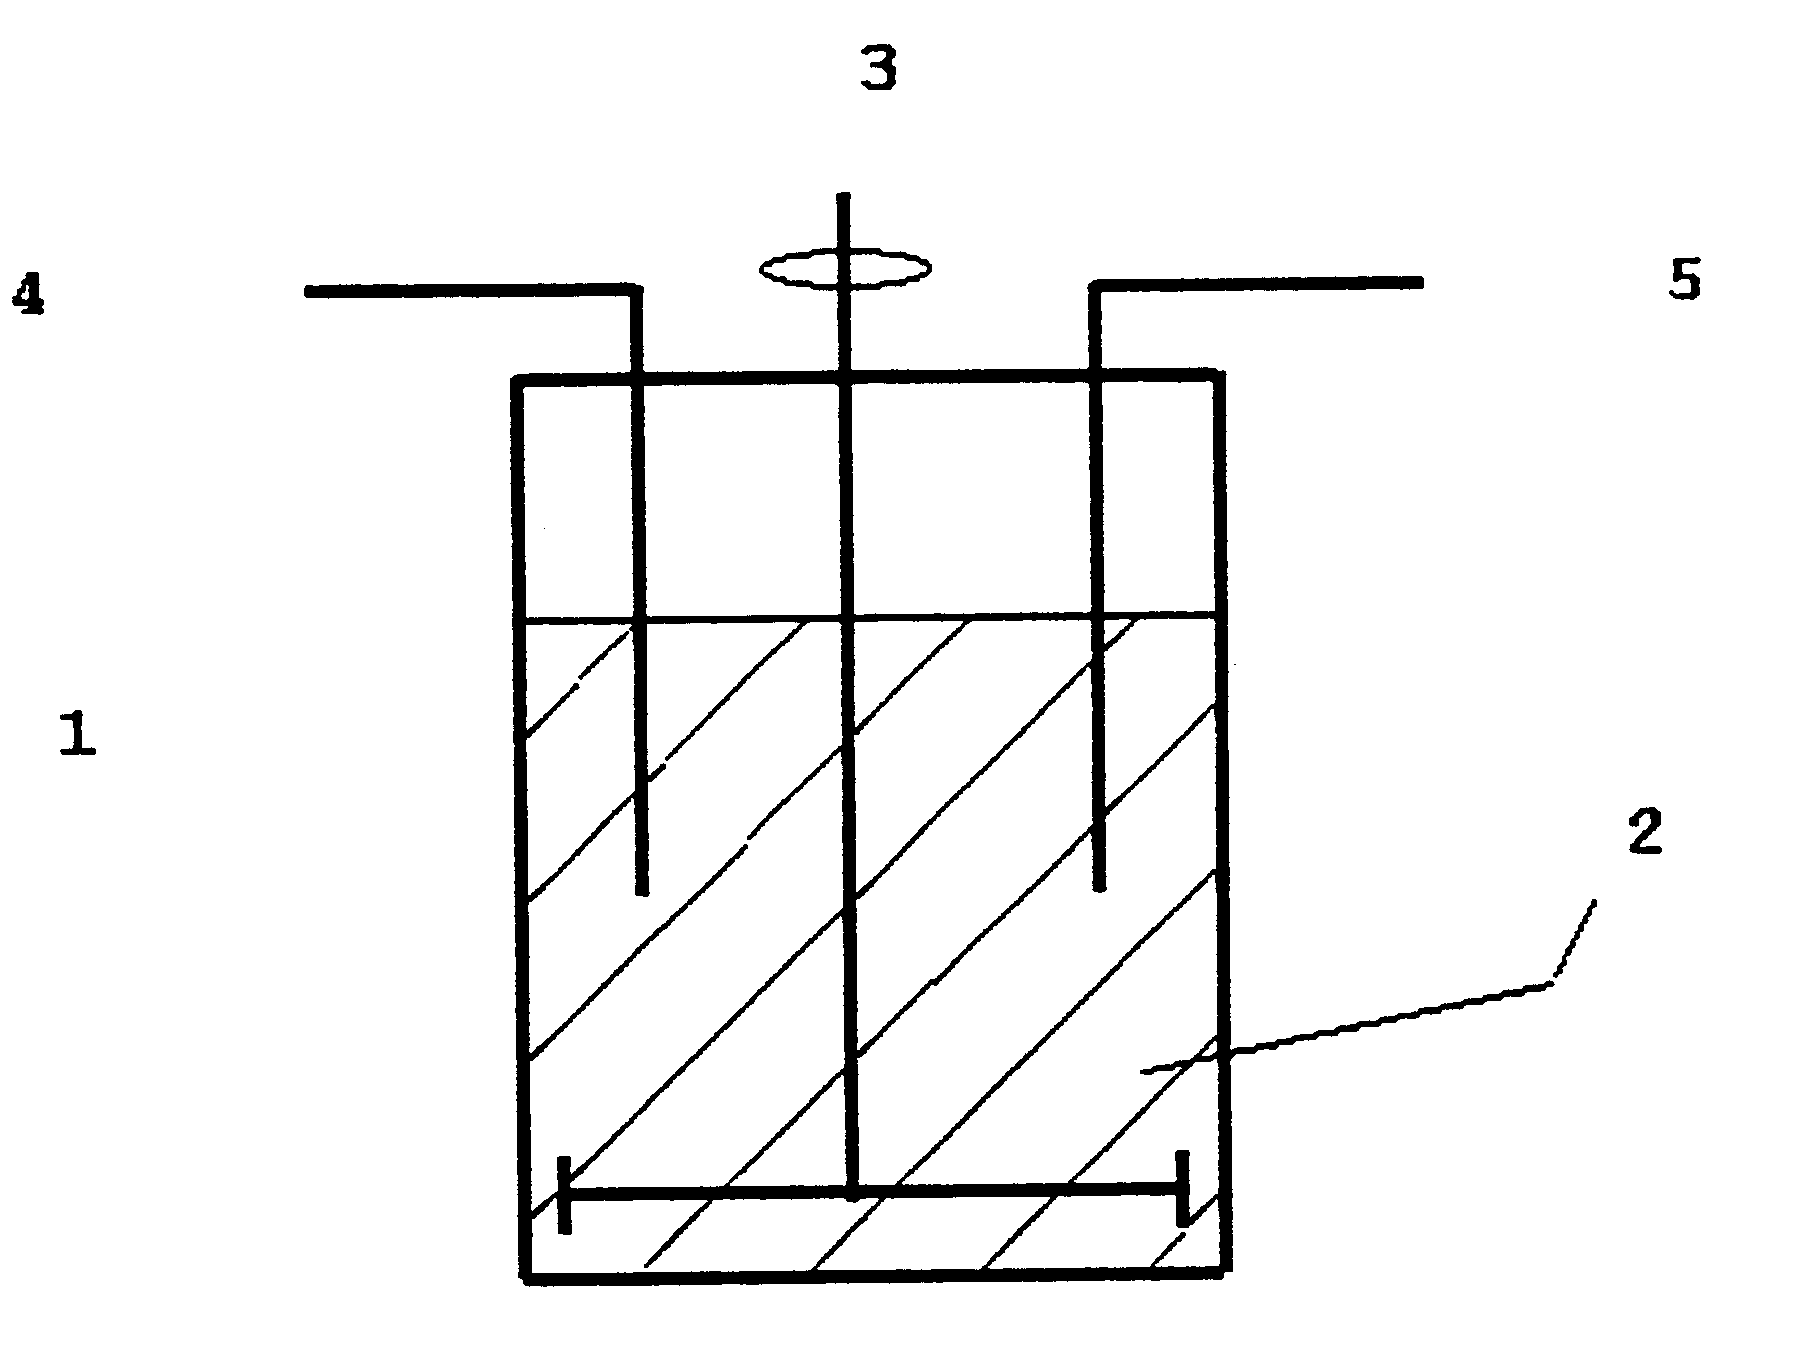 Method for producing composite powders based on silver-tin oxide, the composite powders so produced, and the use of such powders to produce electrical contact materials by powder metallurgy techniques